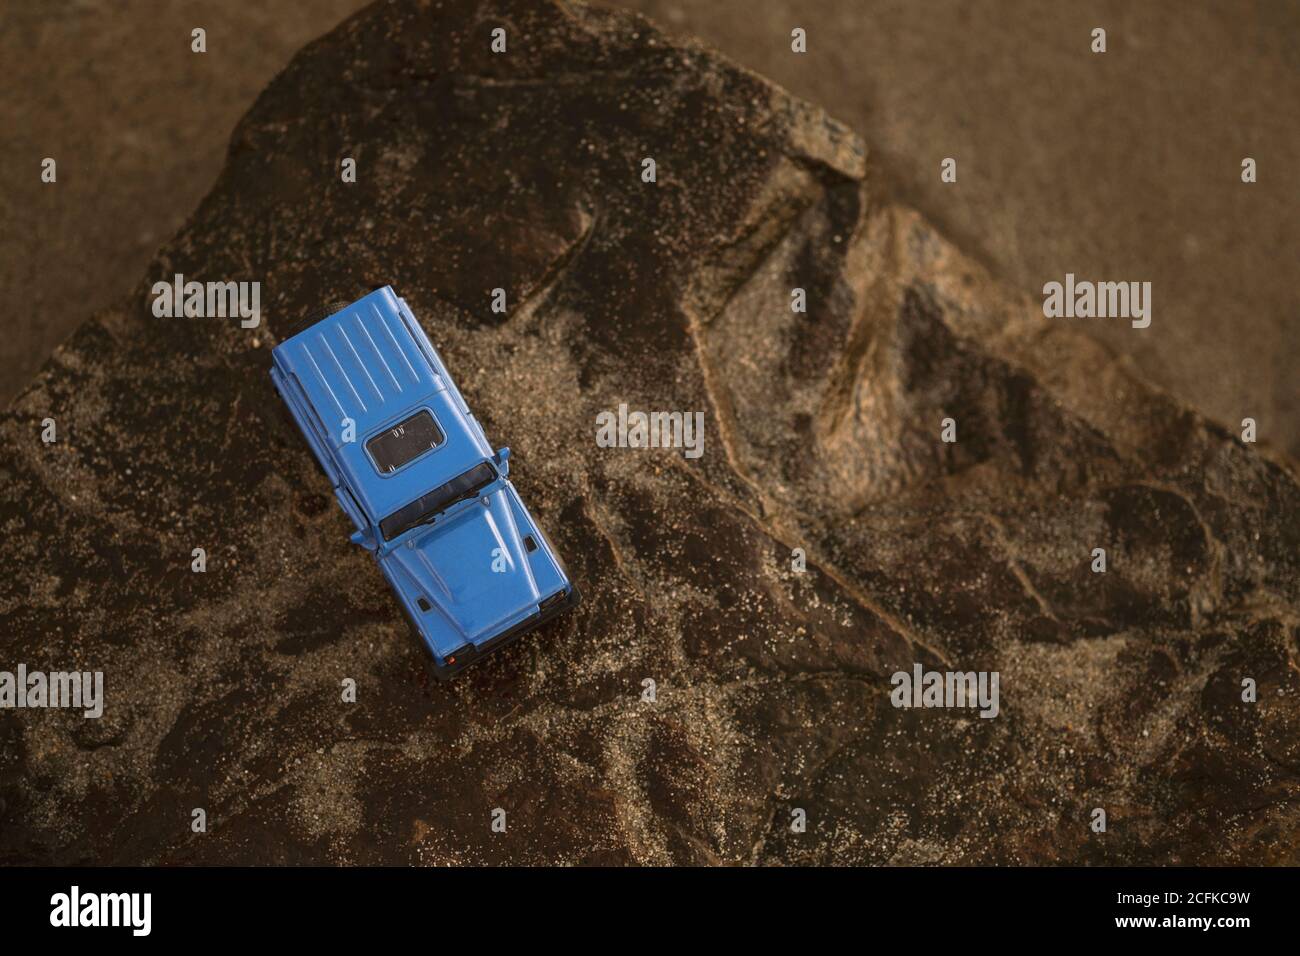 Izmir, Turkey - August 22, 2020: Close up shot of a Land Rover SUV vehicle on a rock and on sunset. Stock Photo